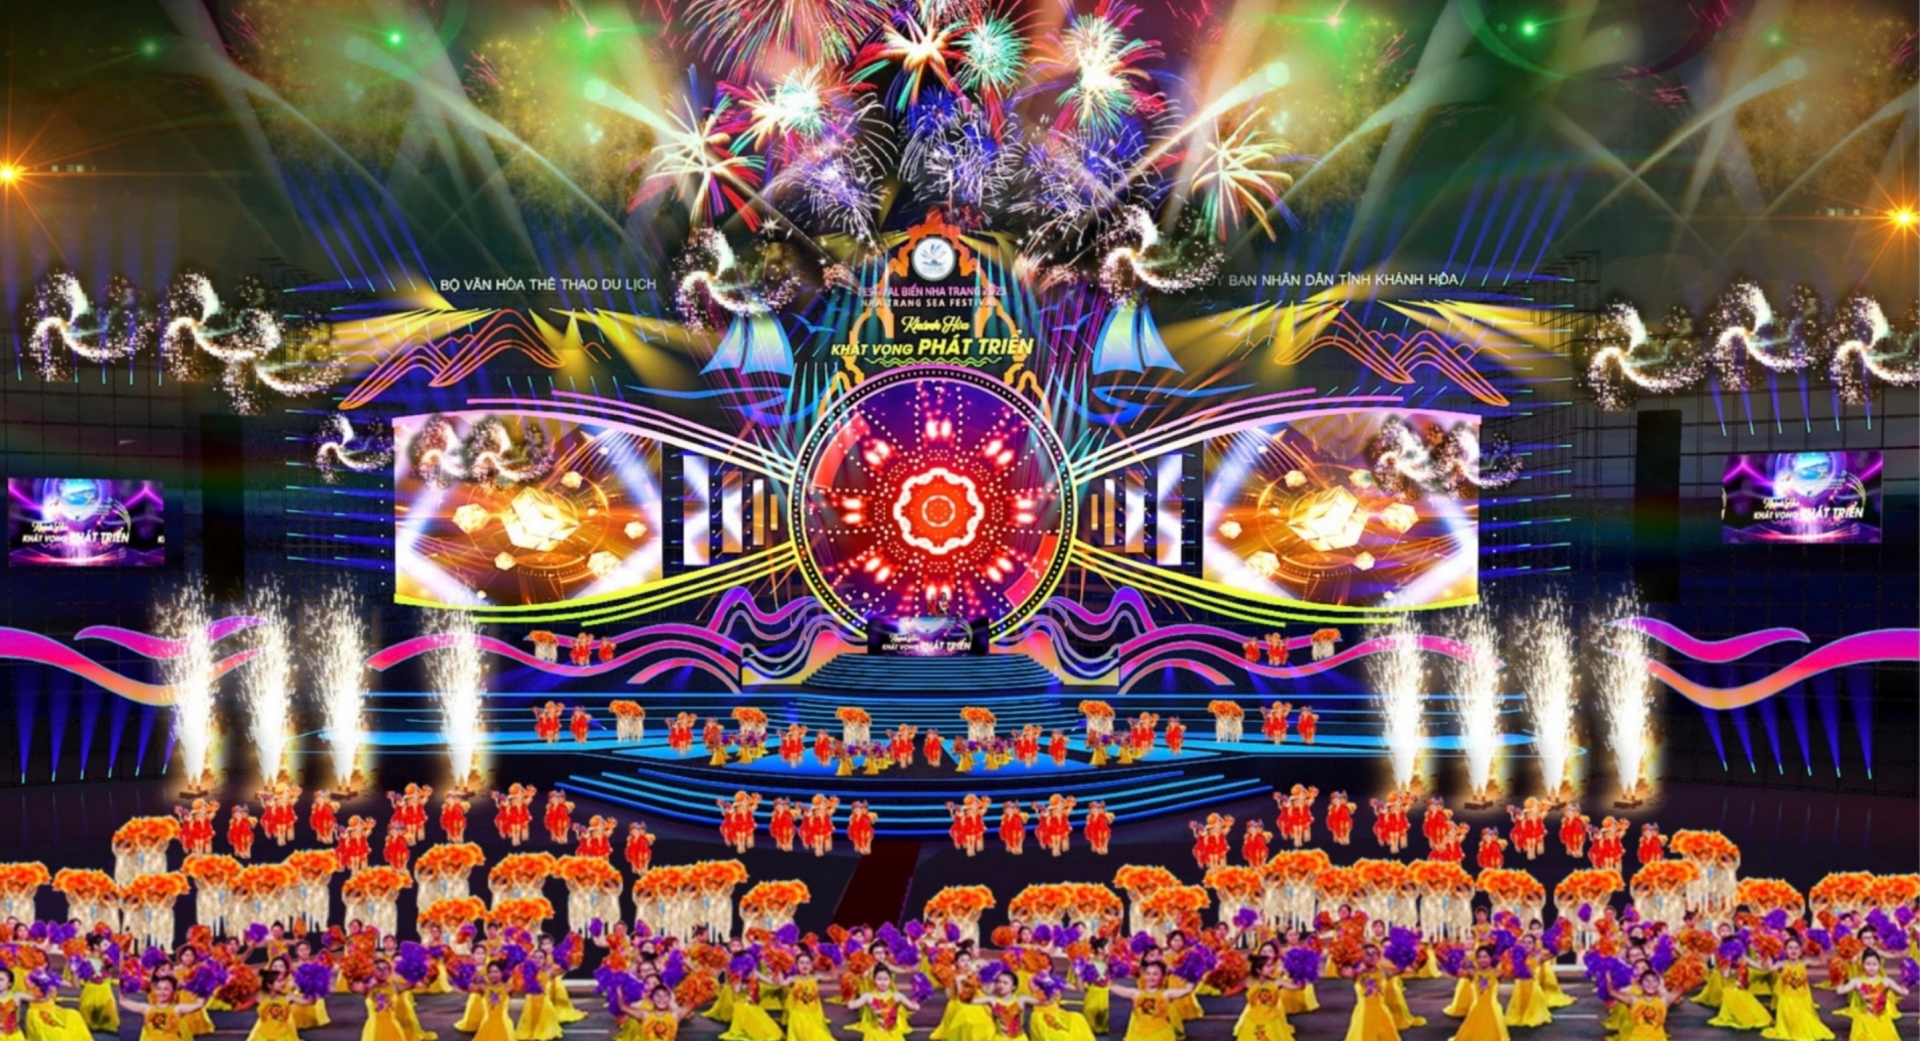 Expected stage design of the opening night of Nha Trang-Khanh Hoa Sea Festival 2023

